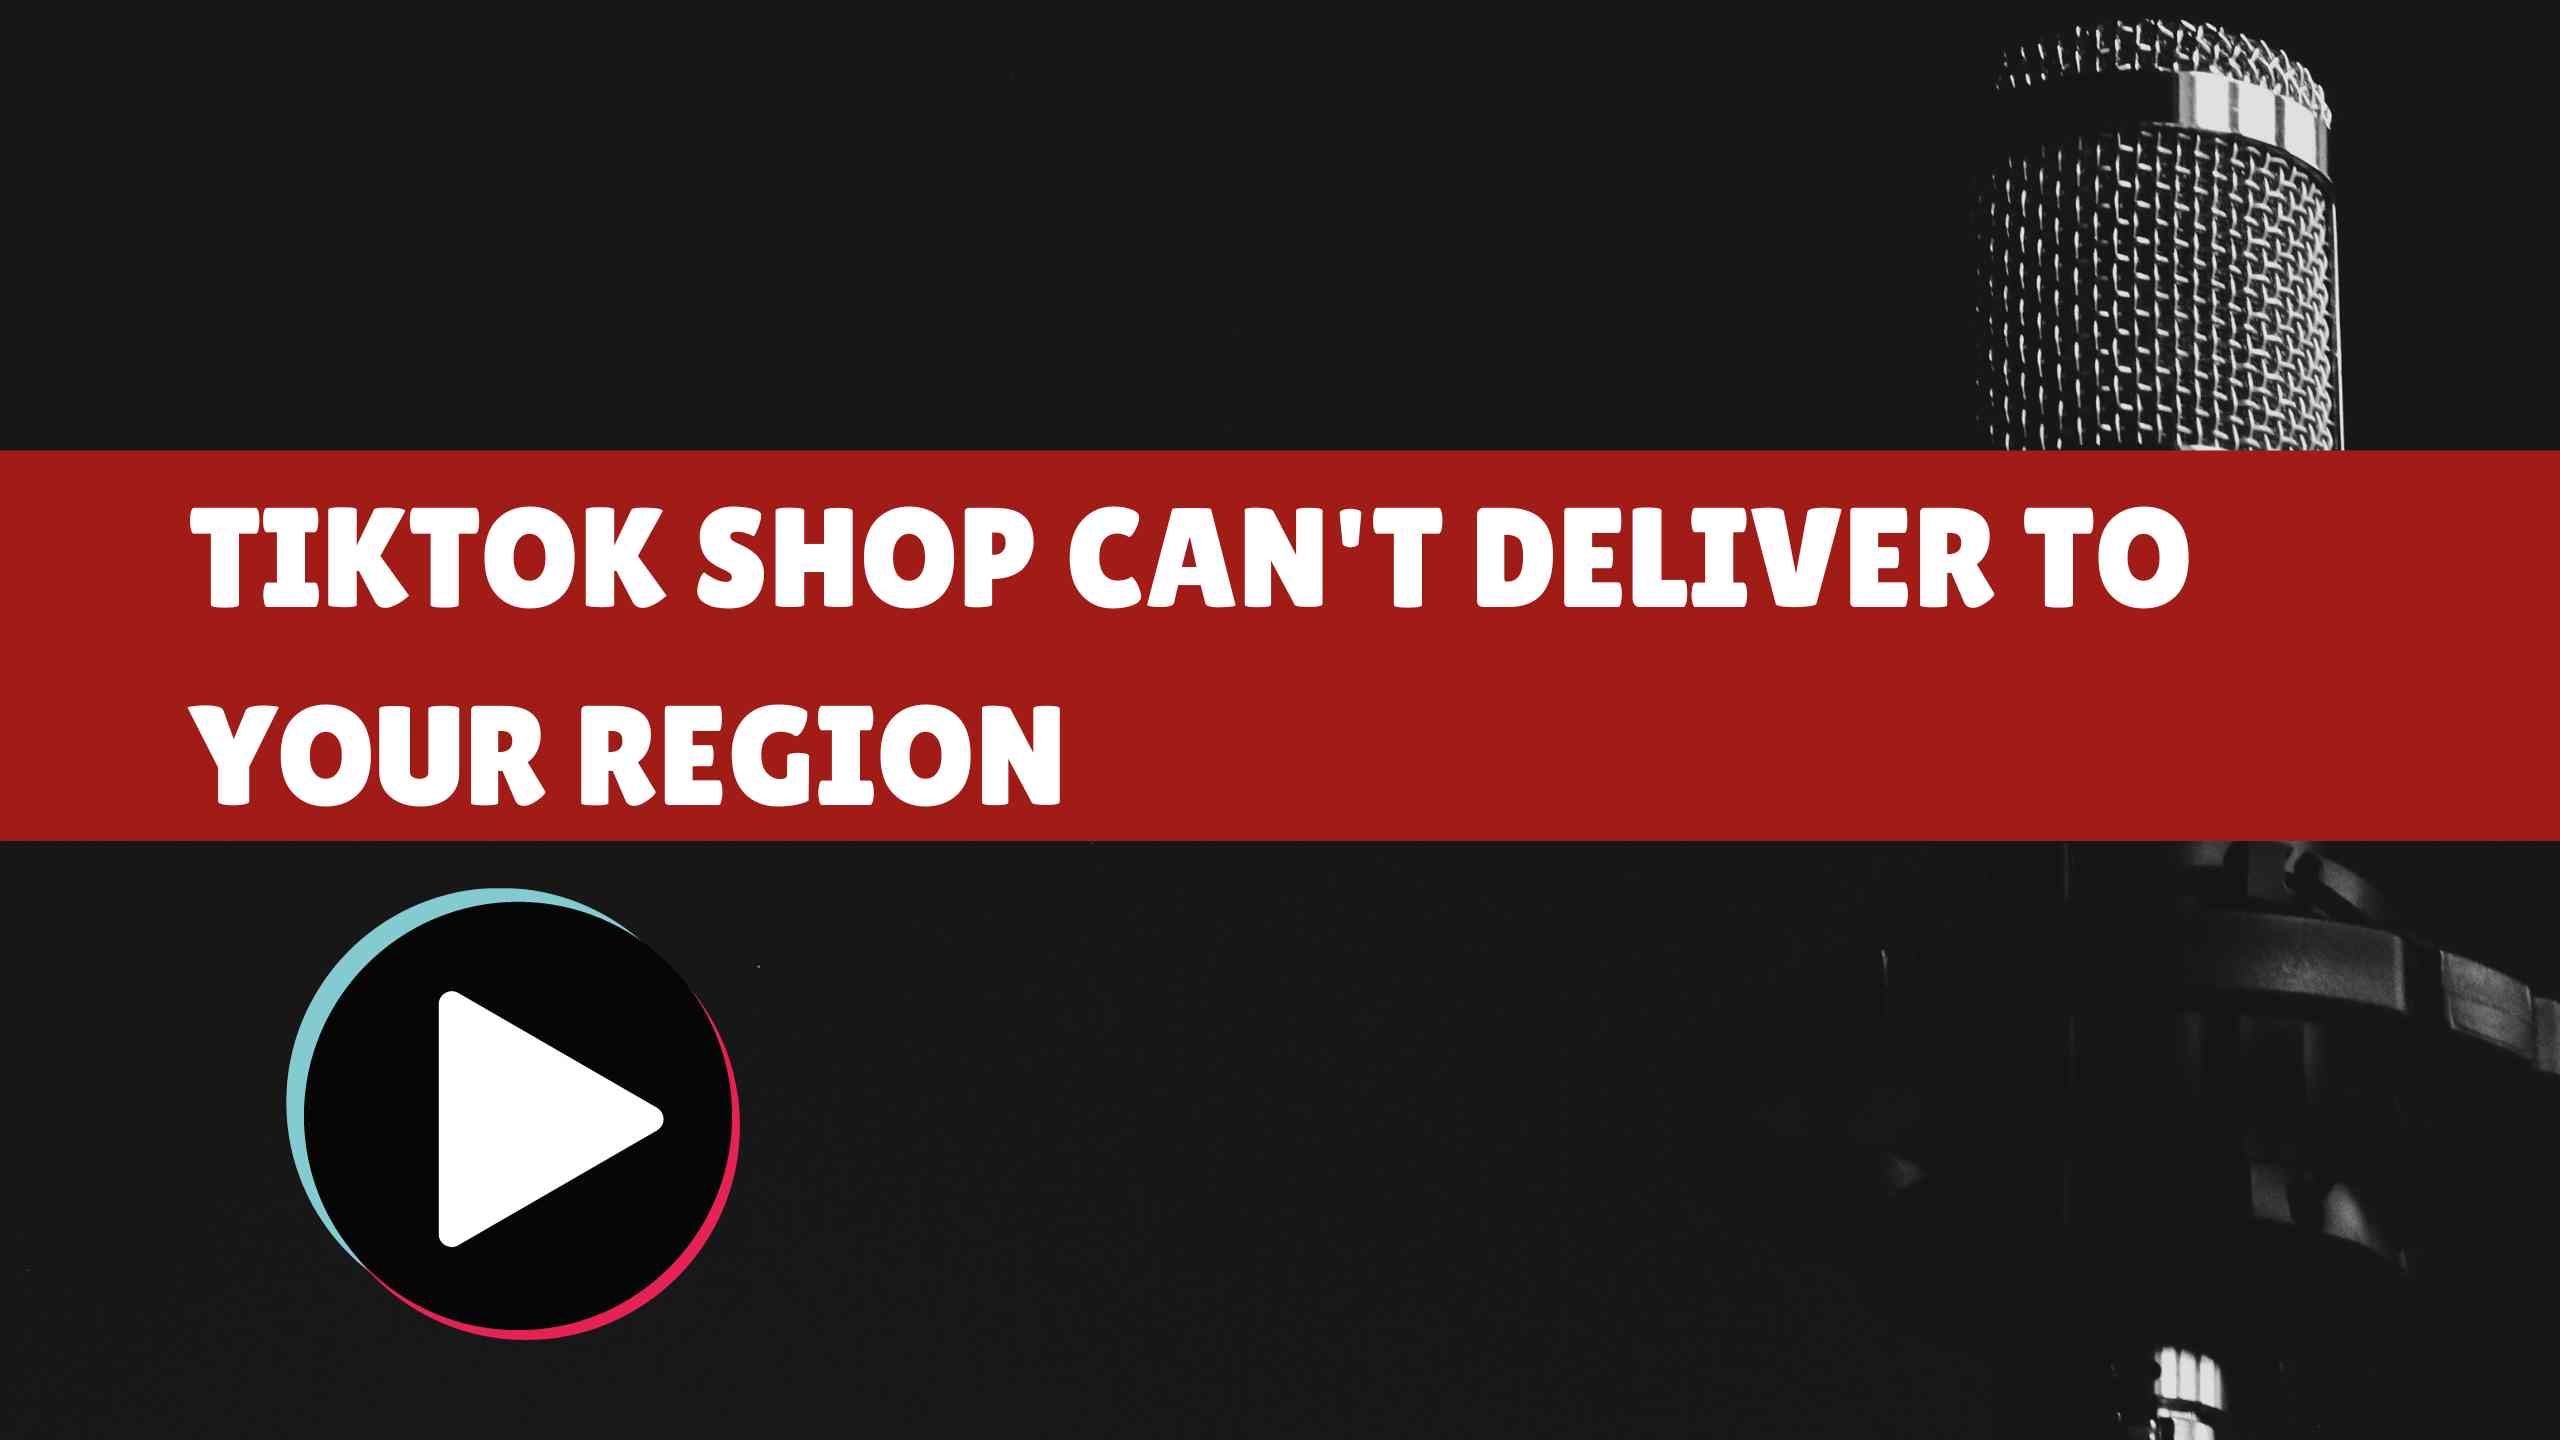 TikTok Shop Can't Deliver to Your Region: What Should You Need to Do